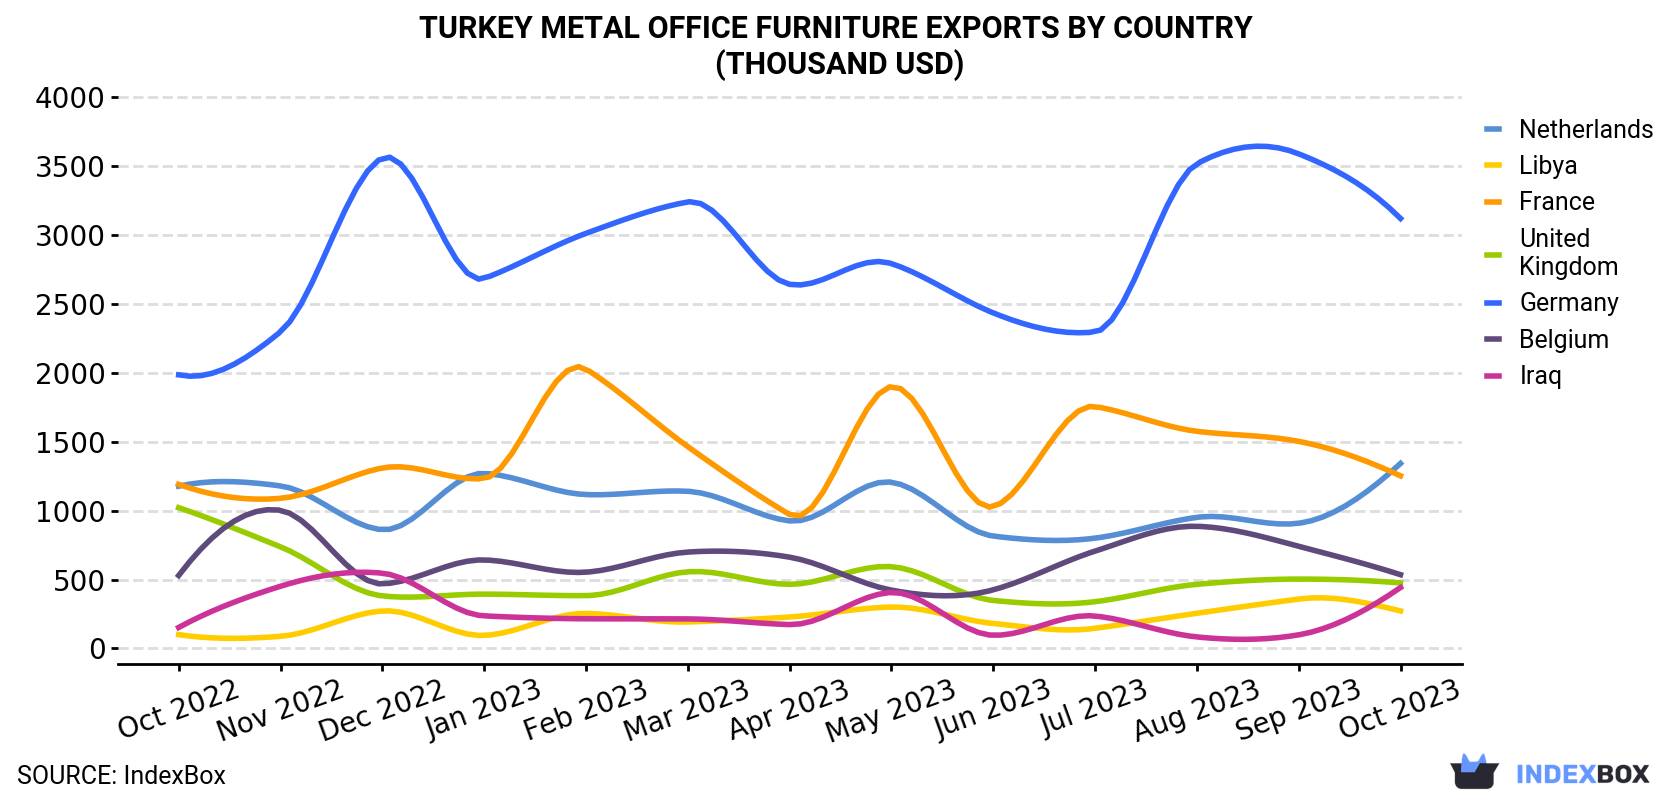 Turkey Metal Office Furniture Exports By Country (Thousand USD)